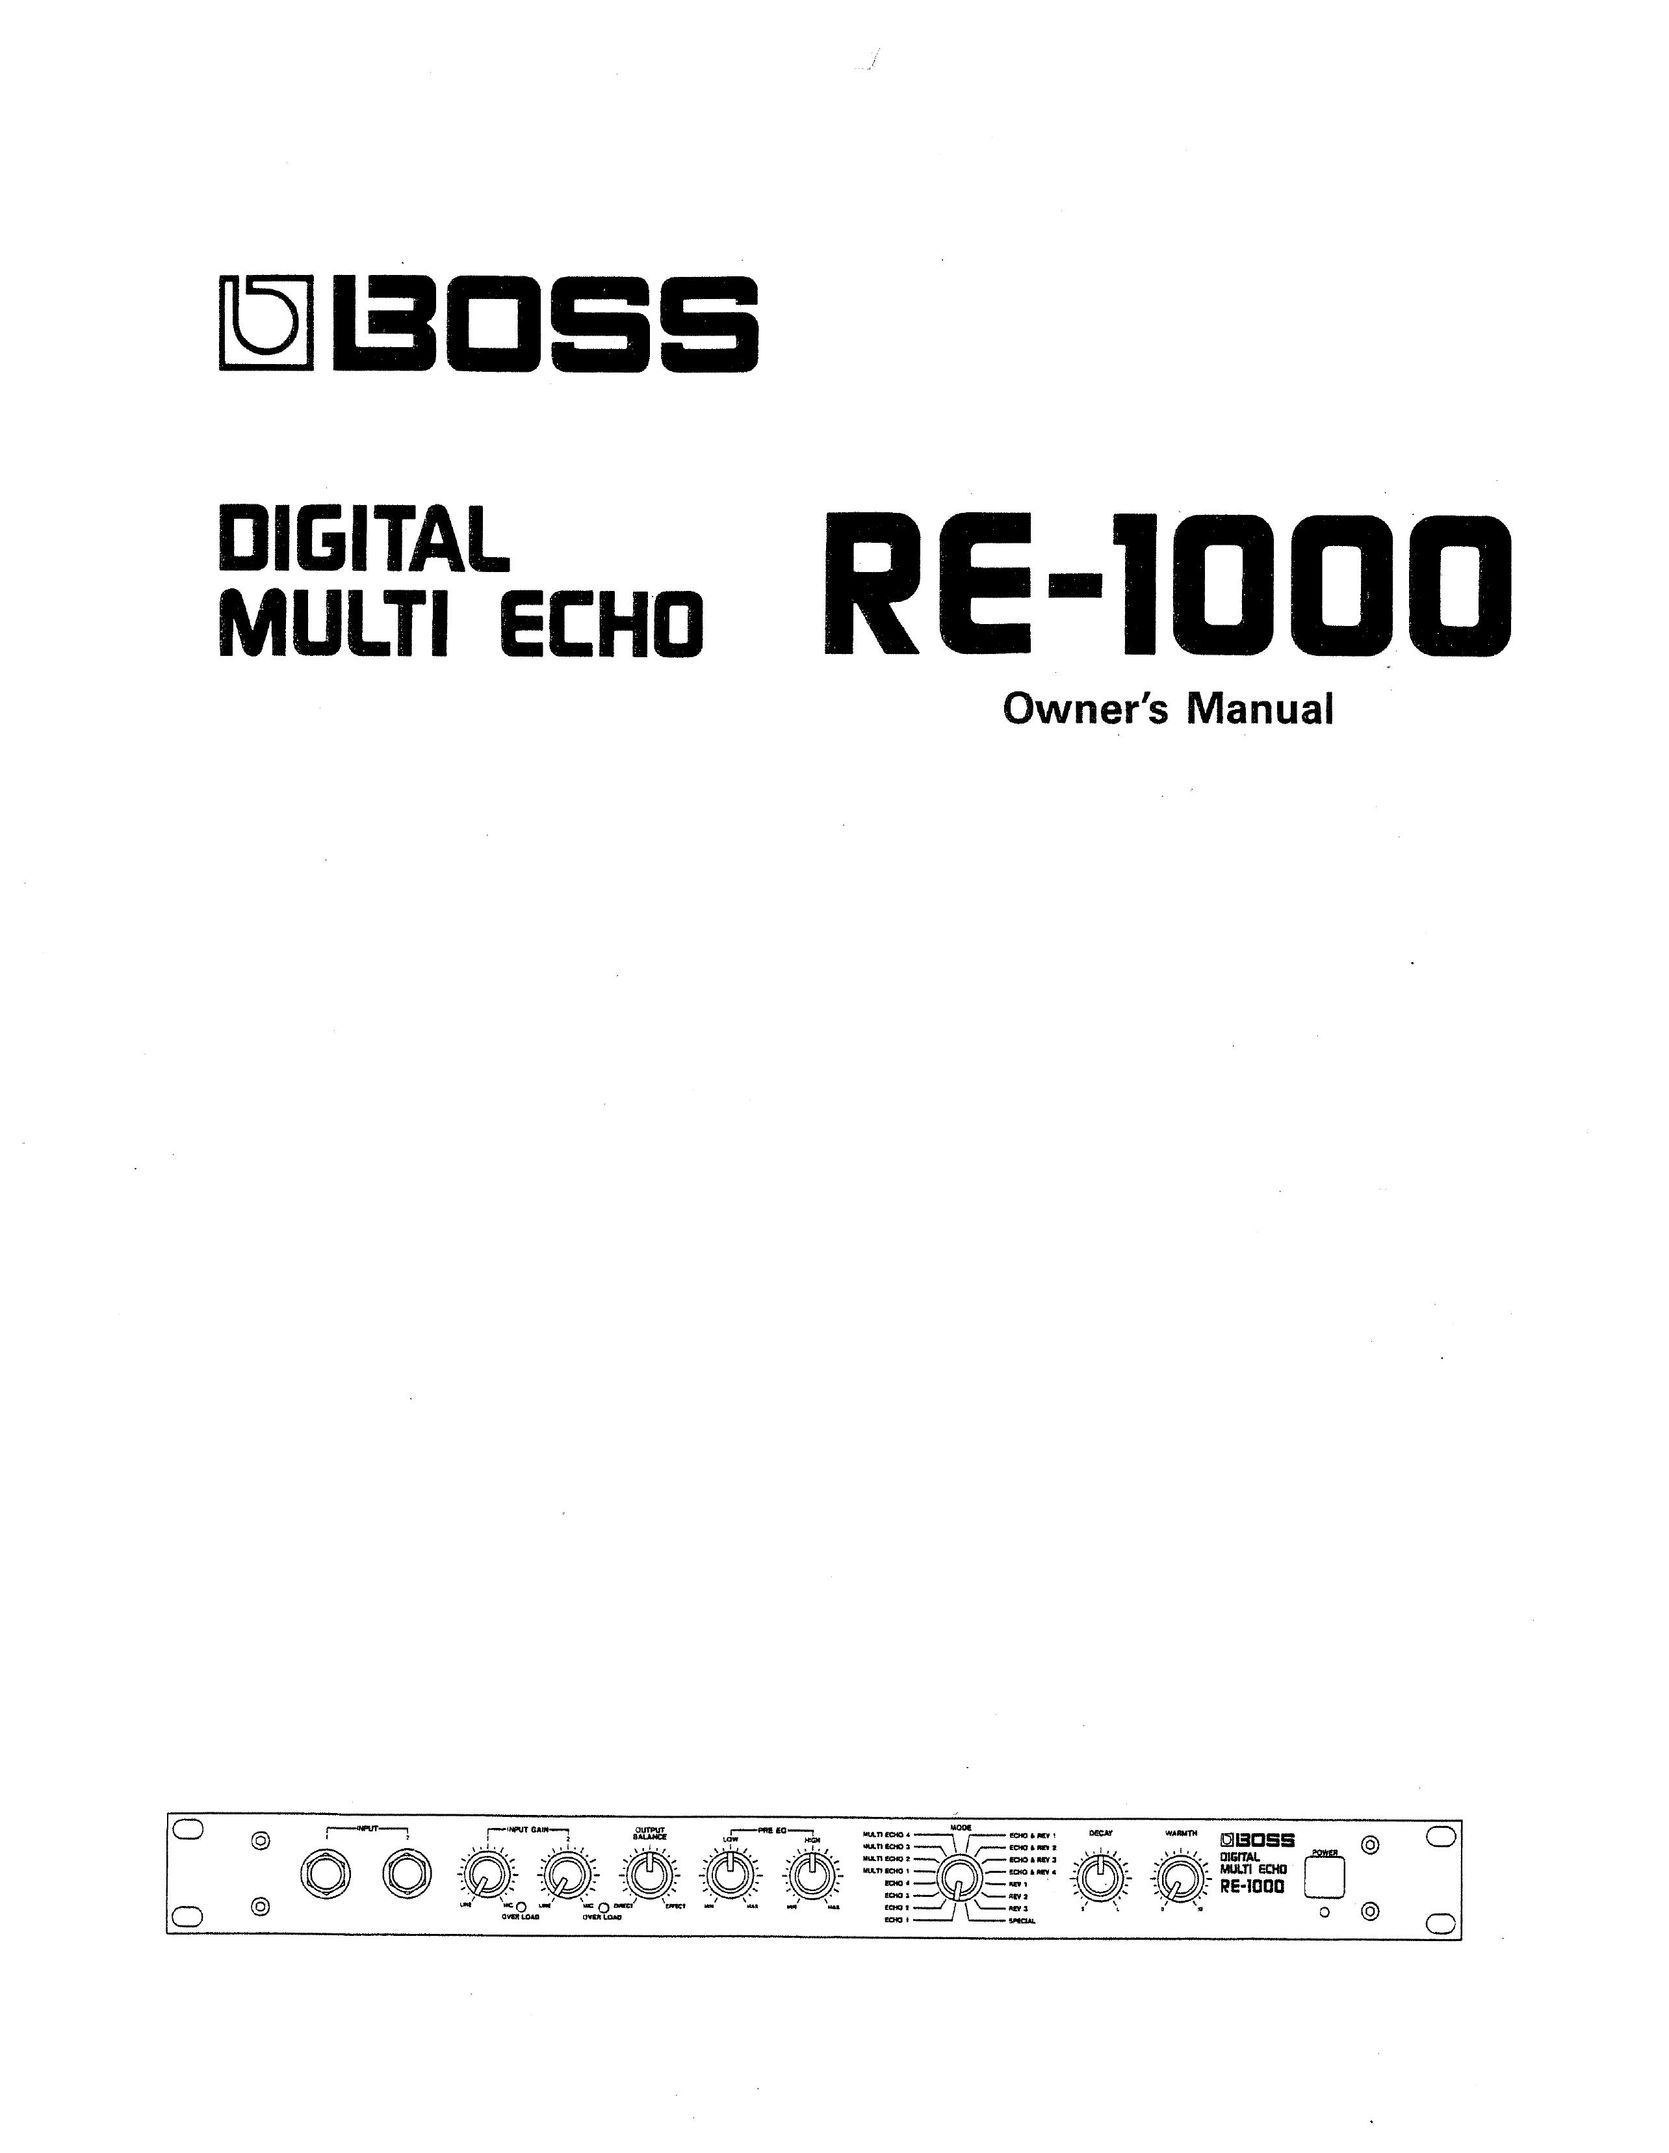 Boss Audio Systems RE-1000 Portable Multimedia Player User Manual